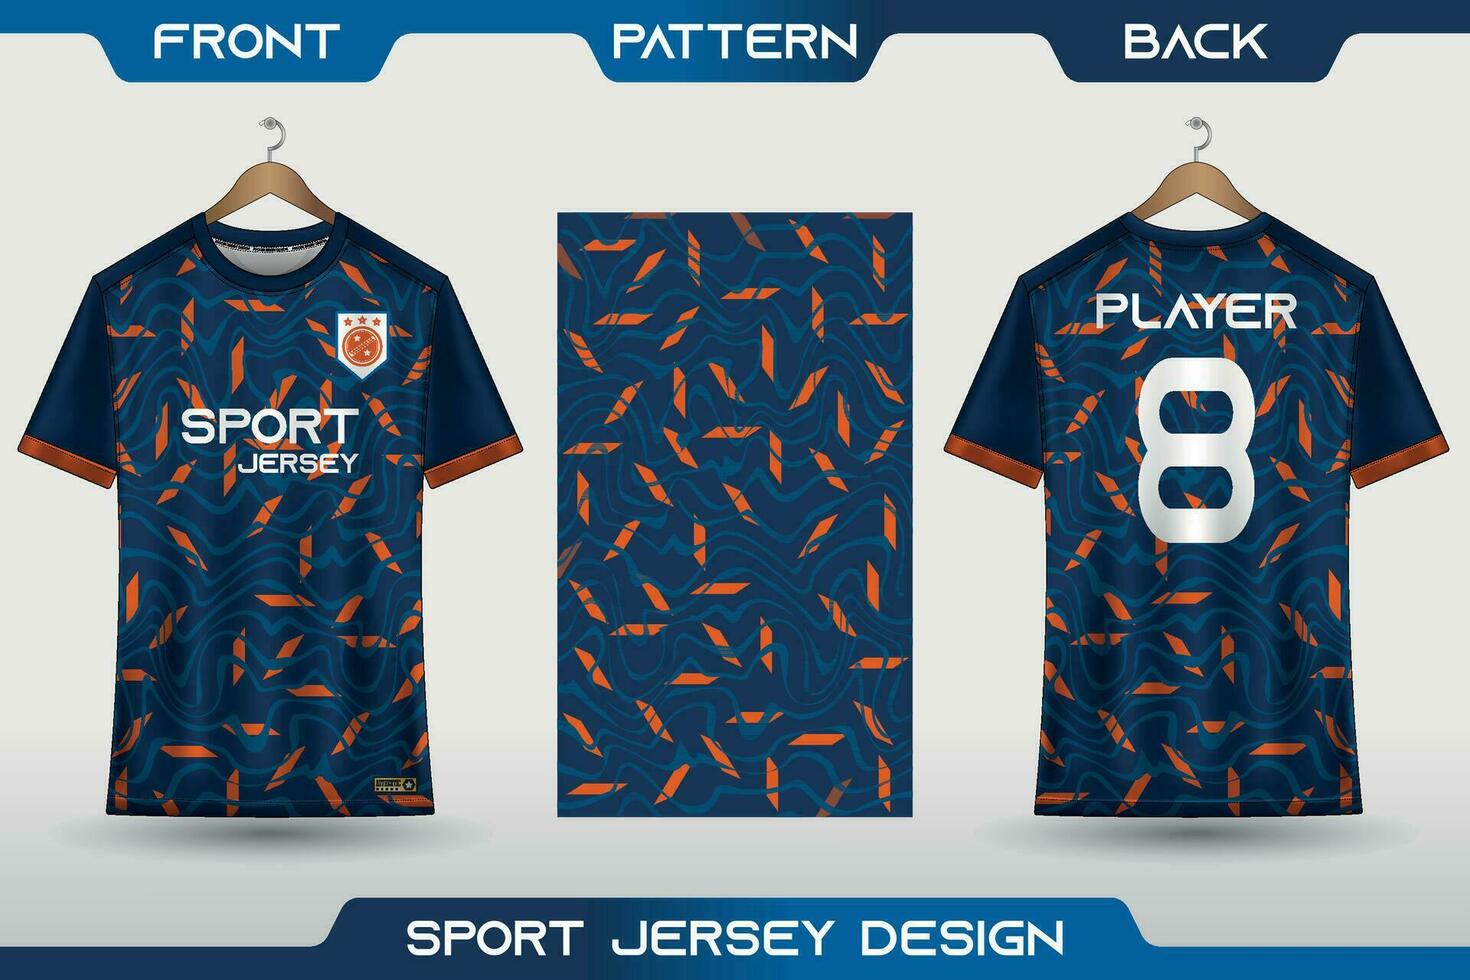 Sports jersey and t-shirt template sports jersey design. Sports design for football, racing, gaming jersey. with front, back view and pattern. vector